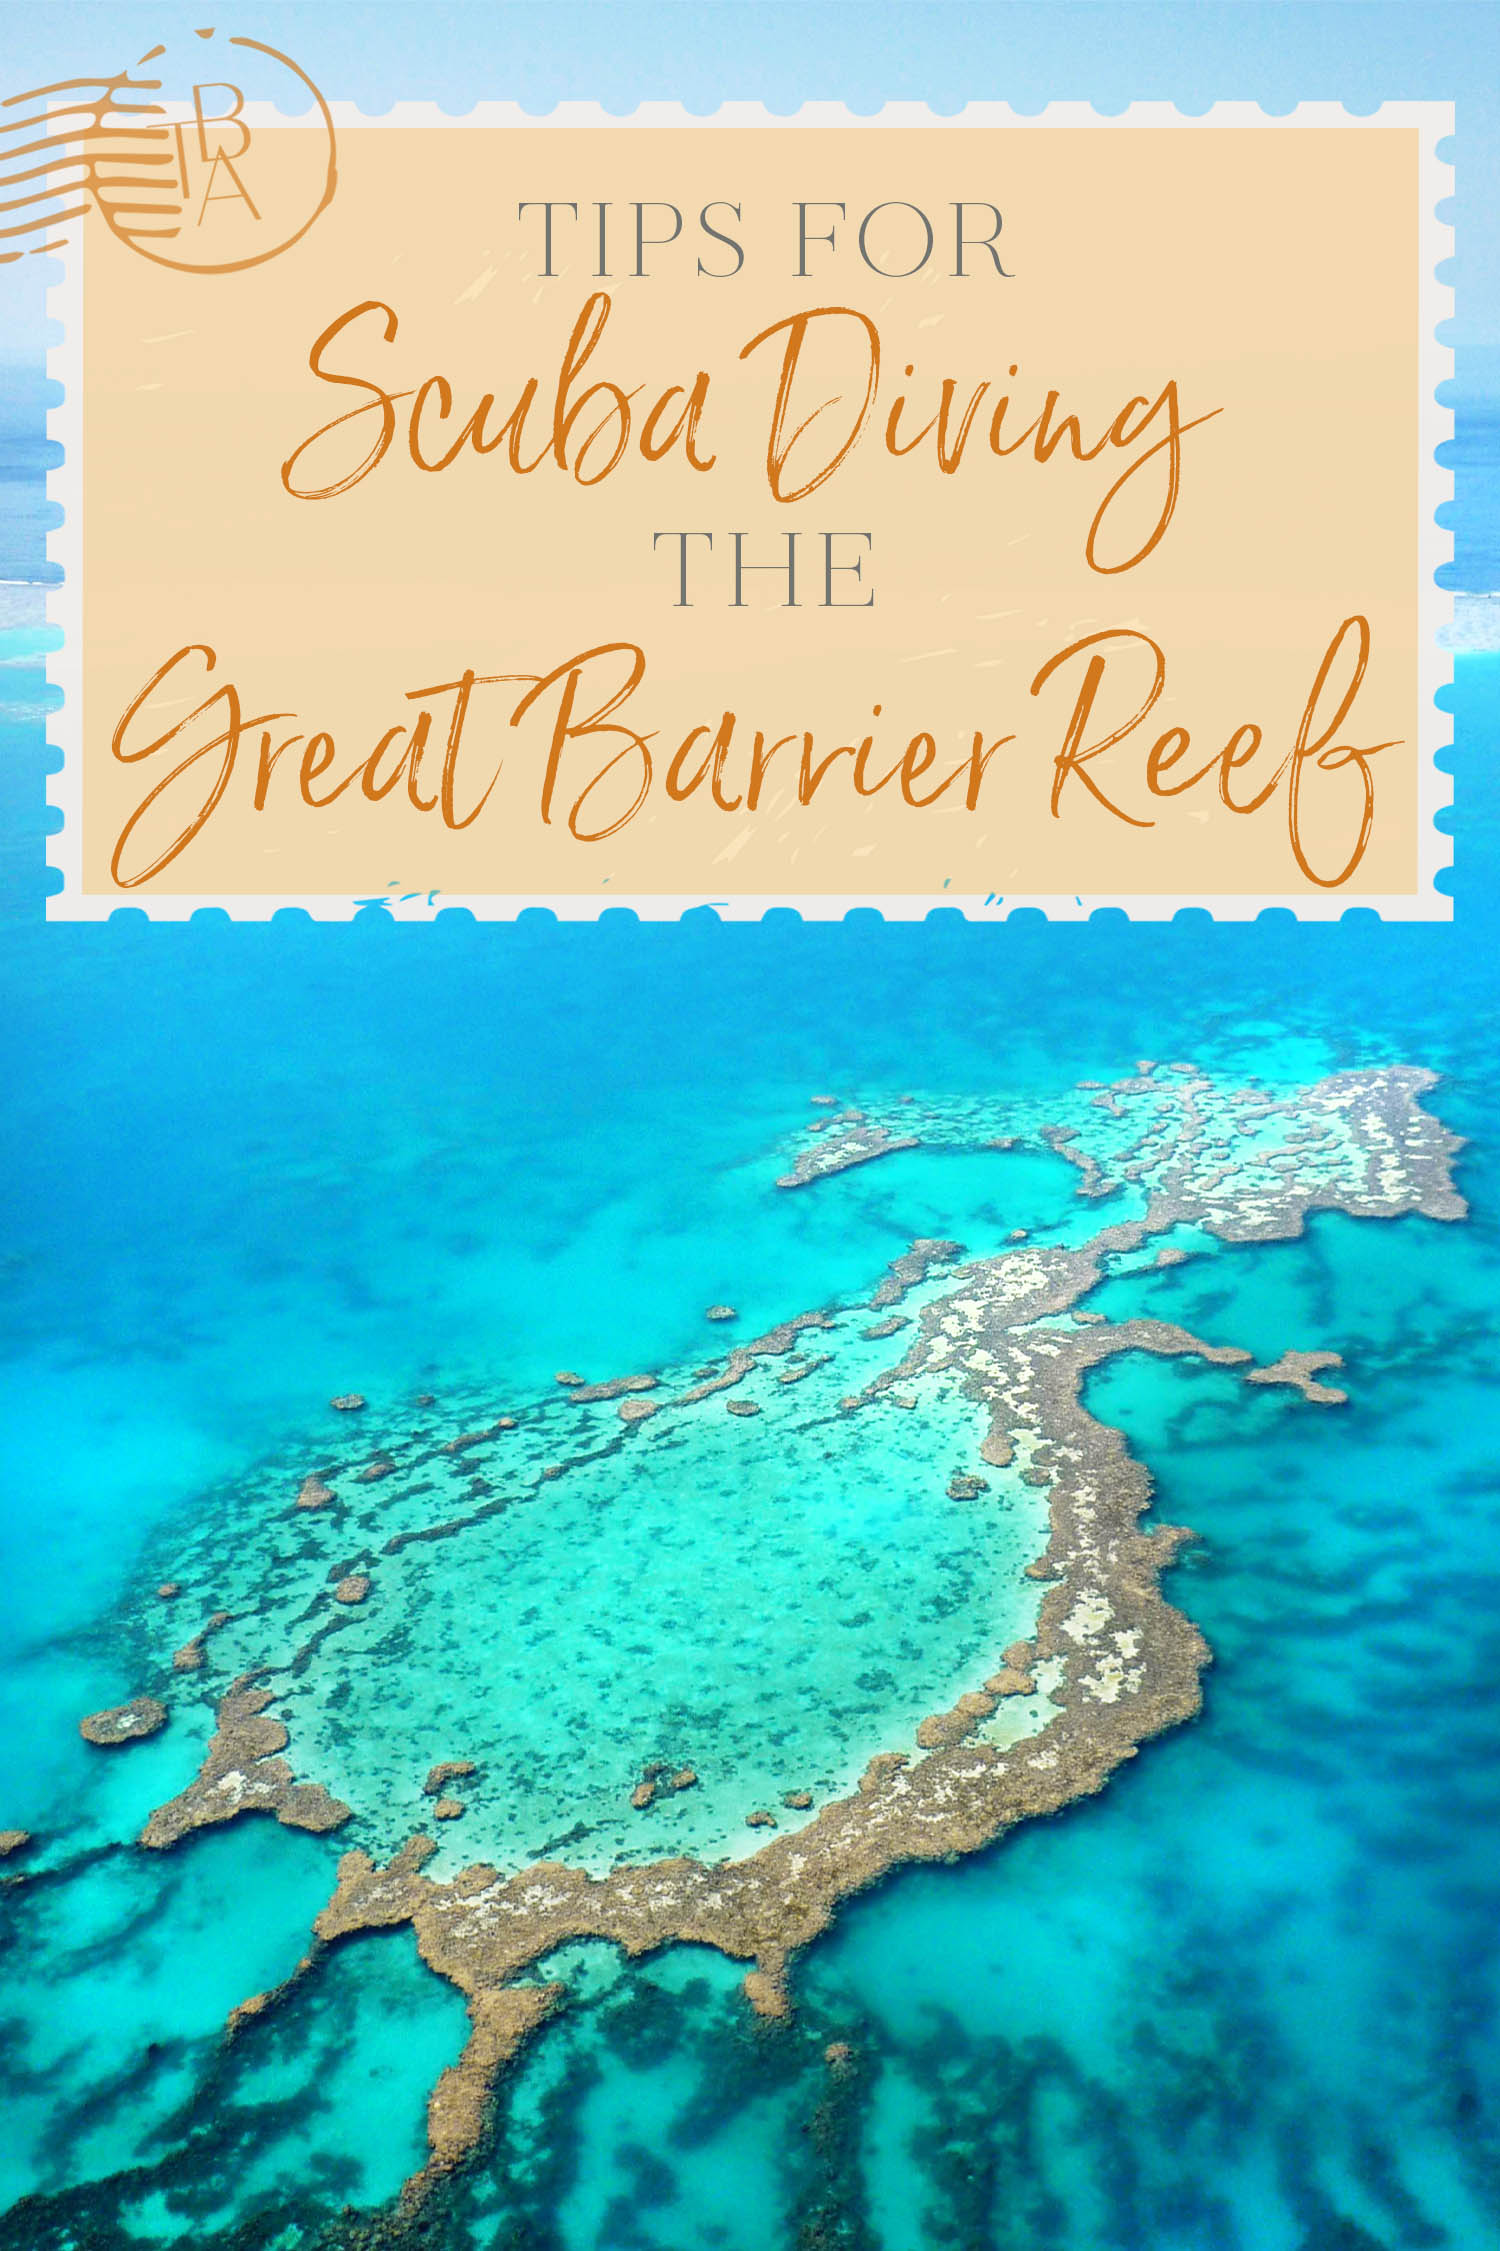 Tips for Diving the Great Barrier Reef